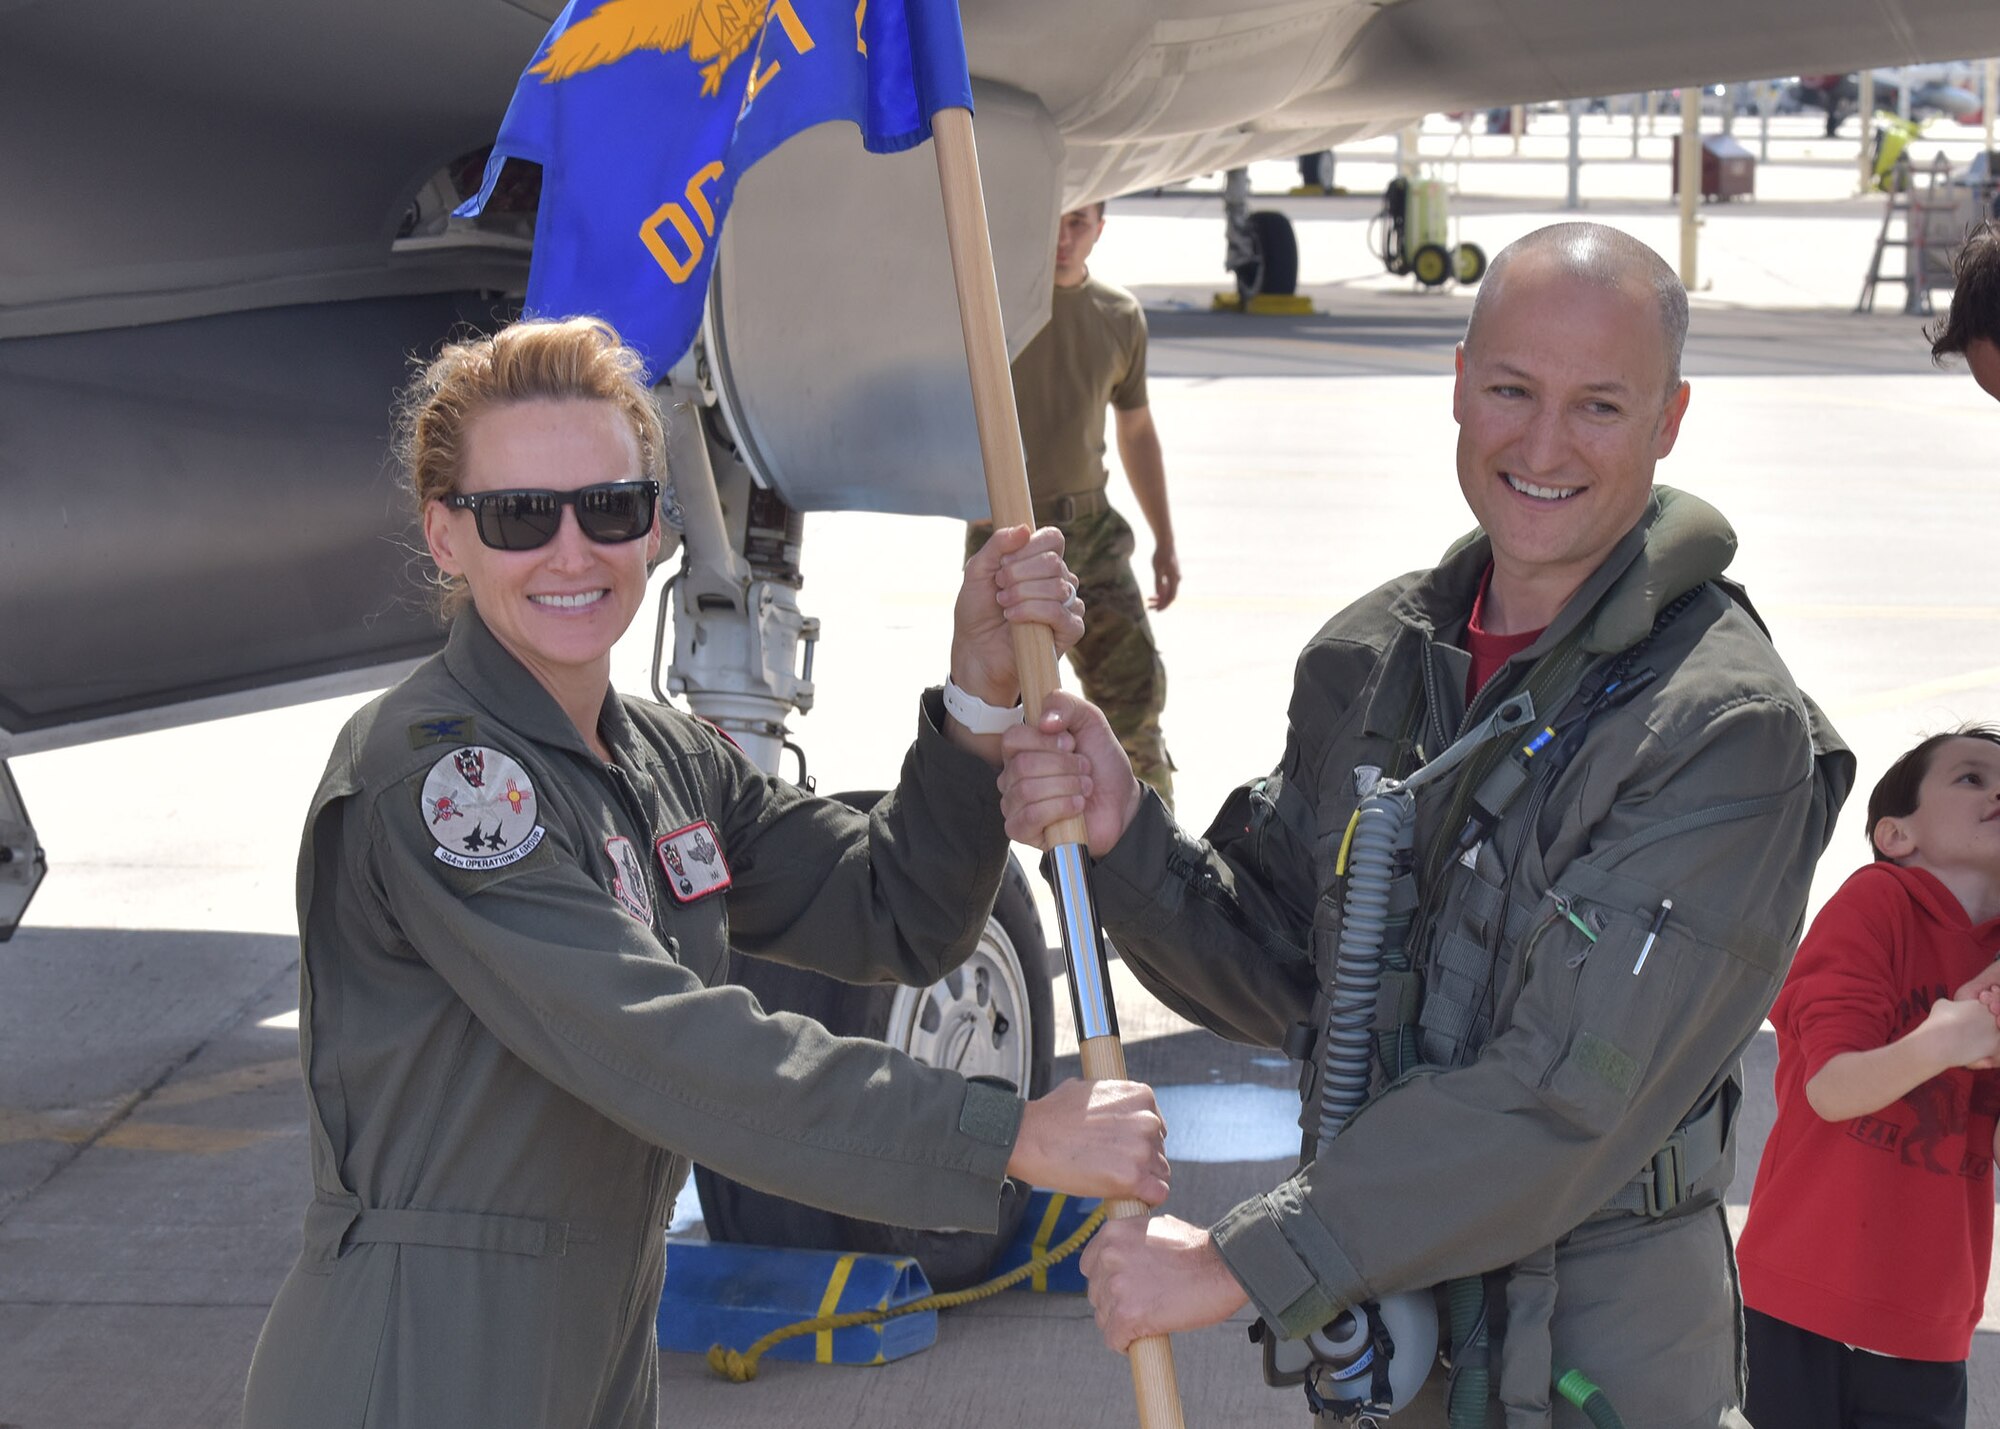 Due to COVID-19 social distancing requirements the 944th Operations Group Detachment 2 employed a creative approach to their recent leadership change by accomplishing an in-air change of command ceremony March 27 at Luke Air Force Base, Arizona.